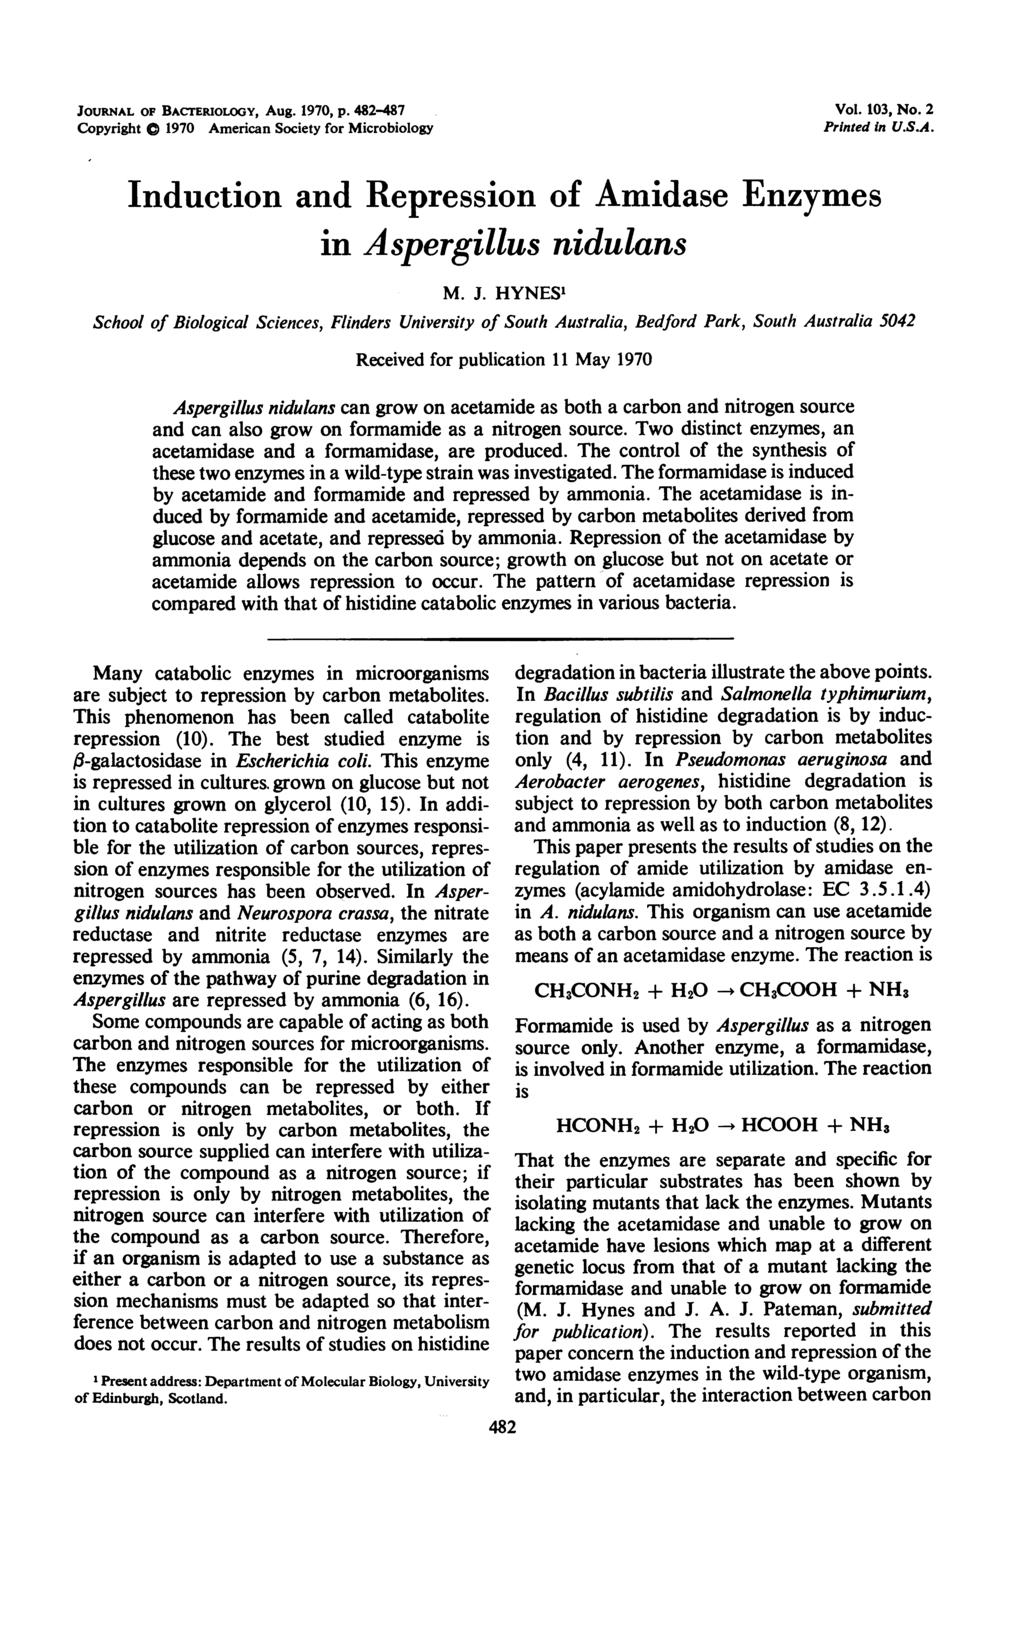 JOURNAL OF BACTERIOLOGY, Aug. 1970, p. 482-487 Copyright 0 1970 American Society for Microbiology Vol. 103, No. 2 Printed in U.S.A. Induction and Repression of Amidase Enzymes in Aspergillus nidulans M.